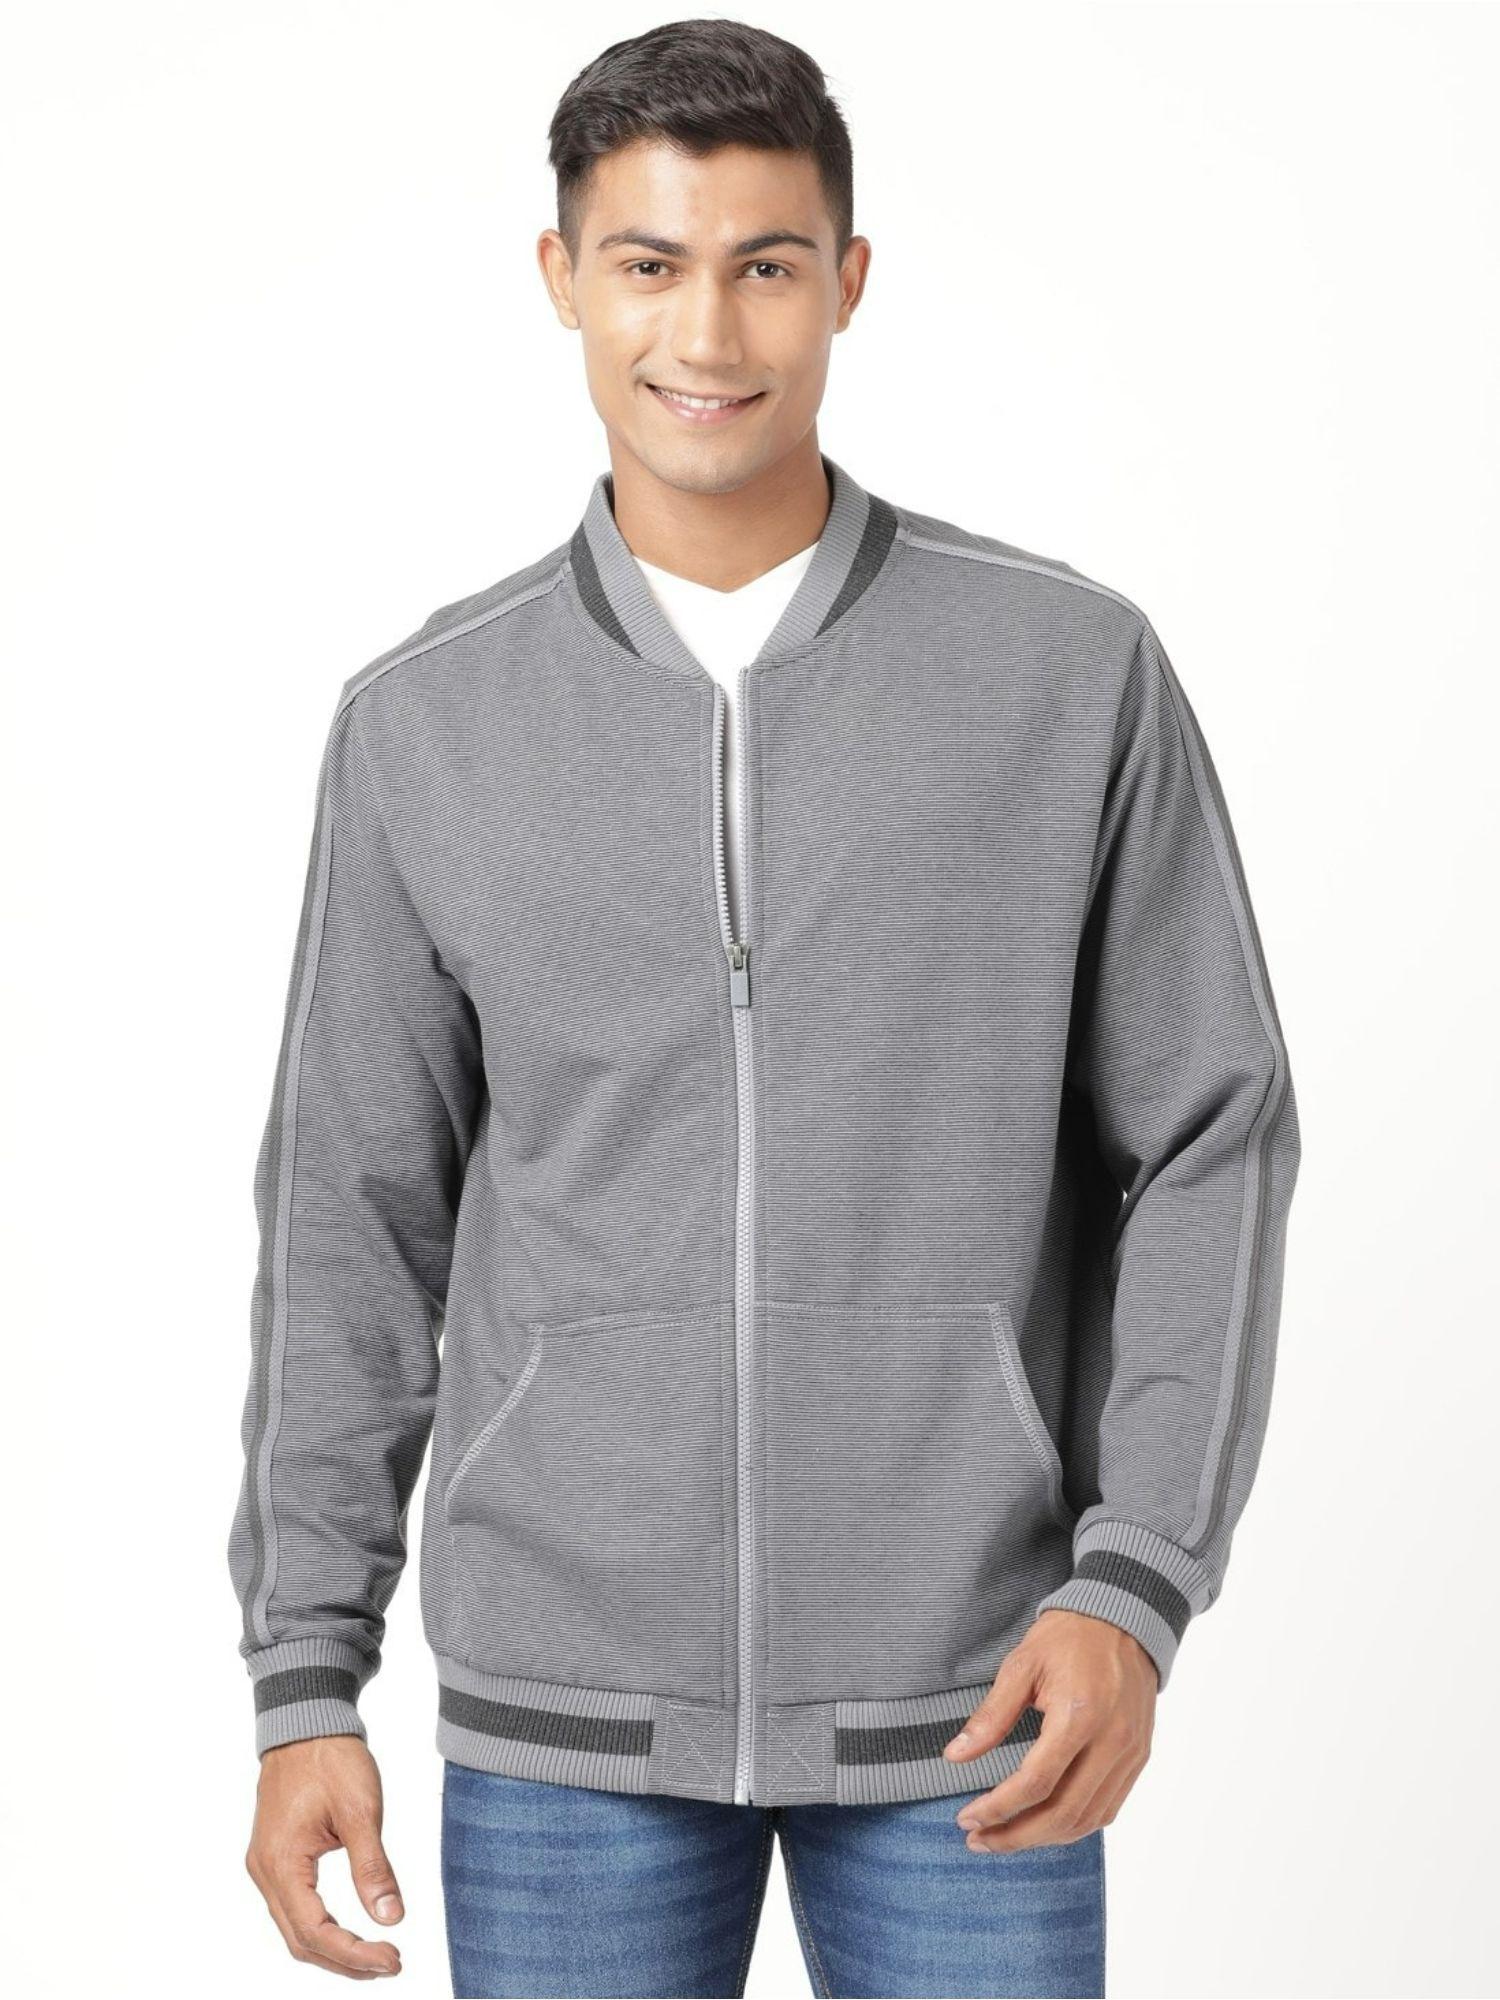 am92 mens cotton rich fleece fabric jacket with stay warm treatment-grey